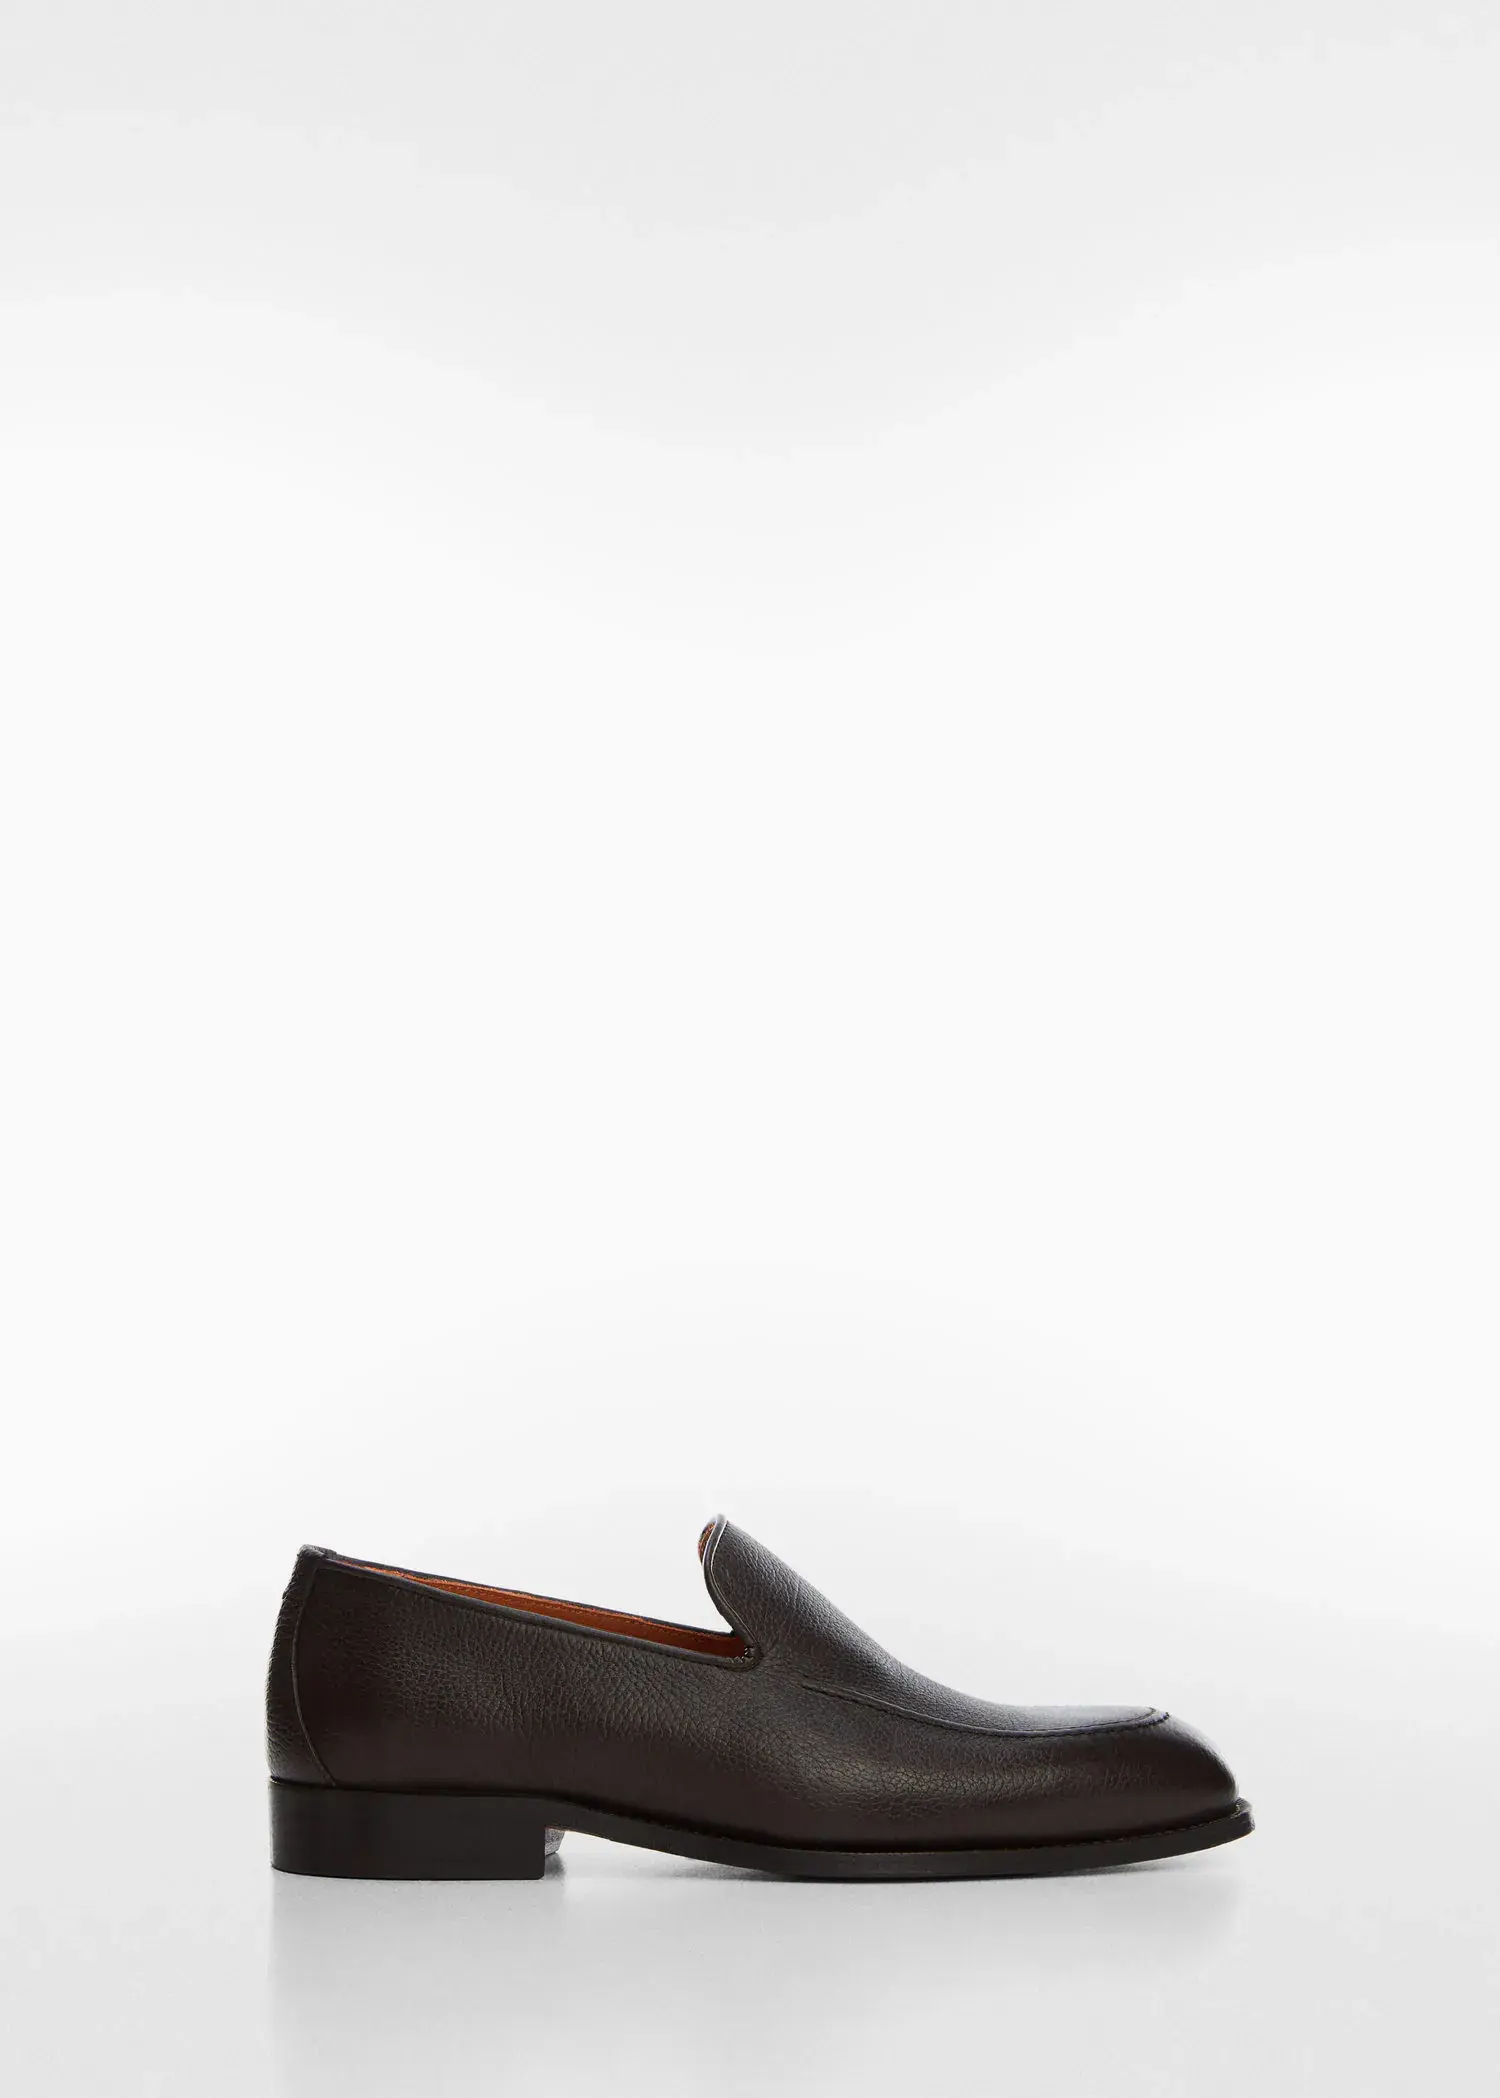 Mango Minimalist leather moccasins. a brown loafer is shown against a white background. 